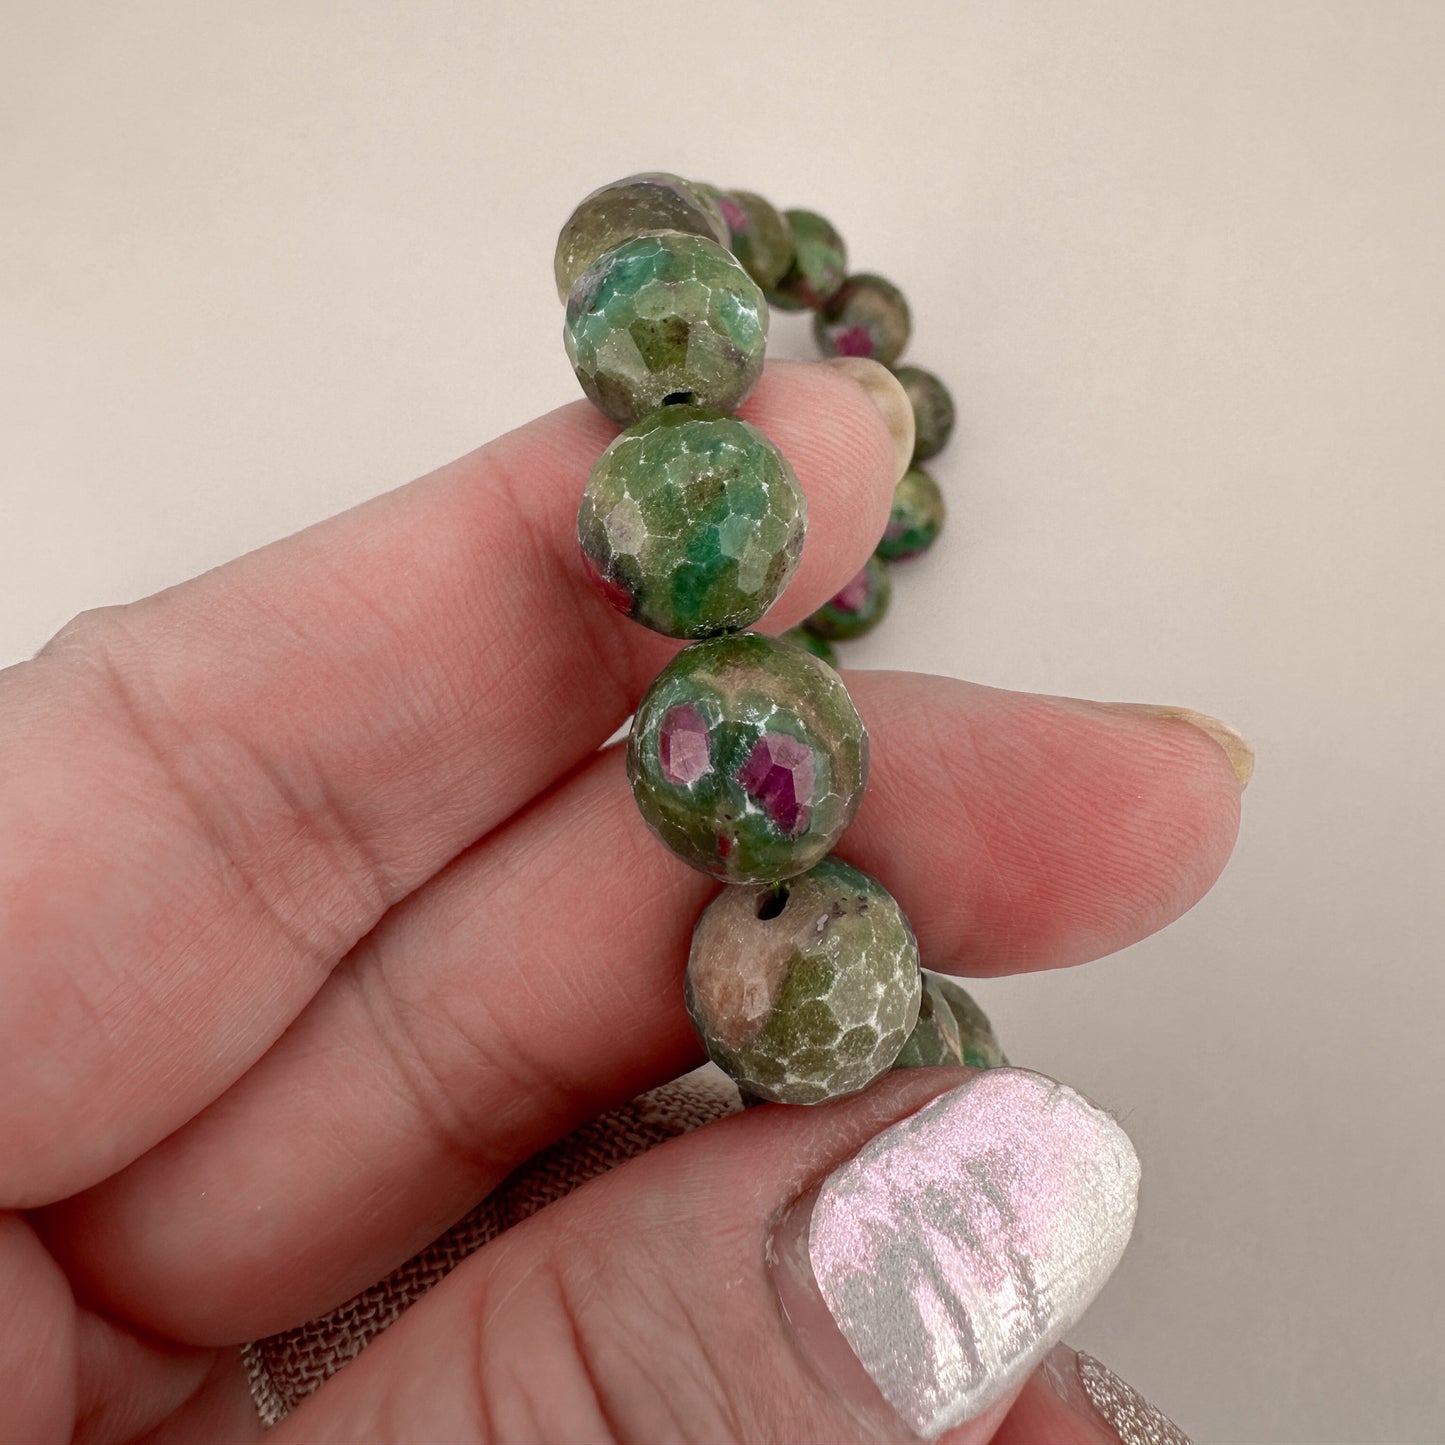 Ruby in Zoisite 6-12mm Faceted Graduated Round Bead Necklace - 1 pc. (J229)